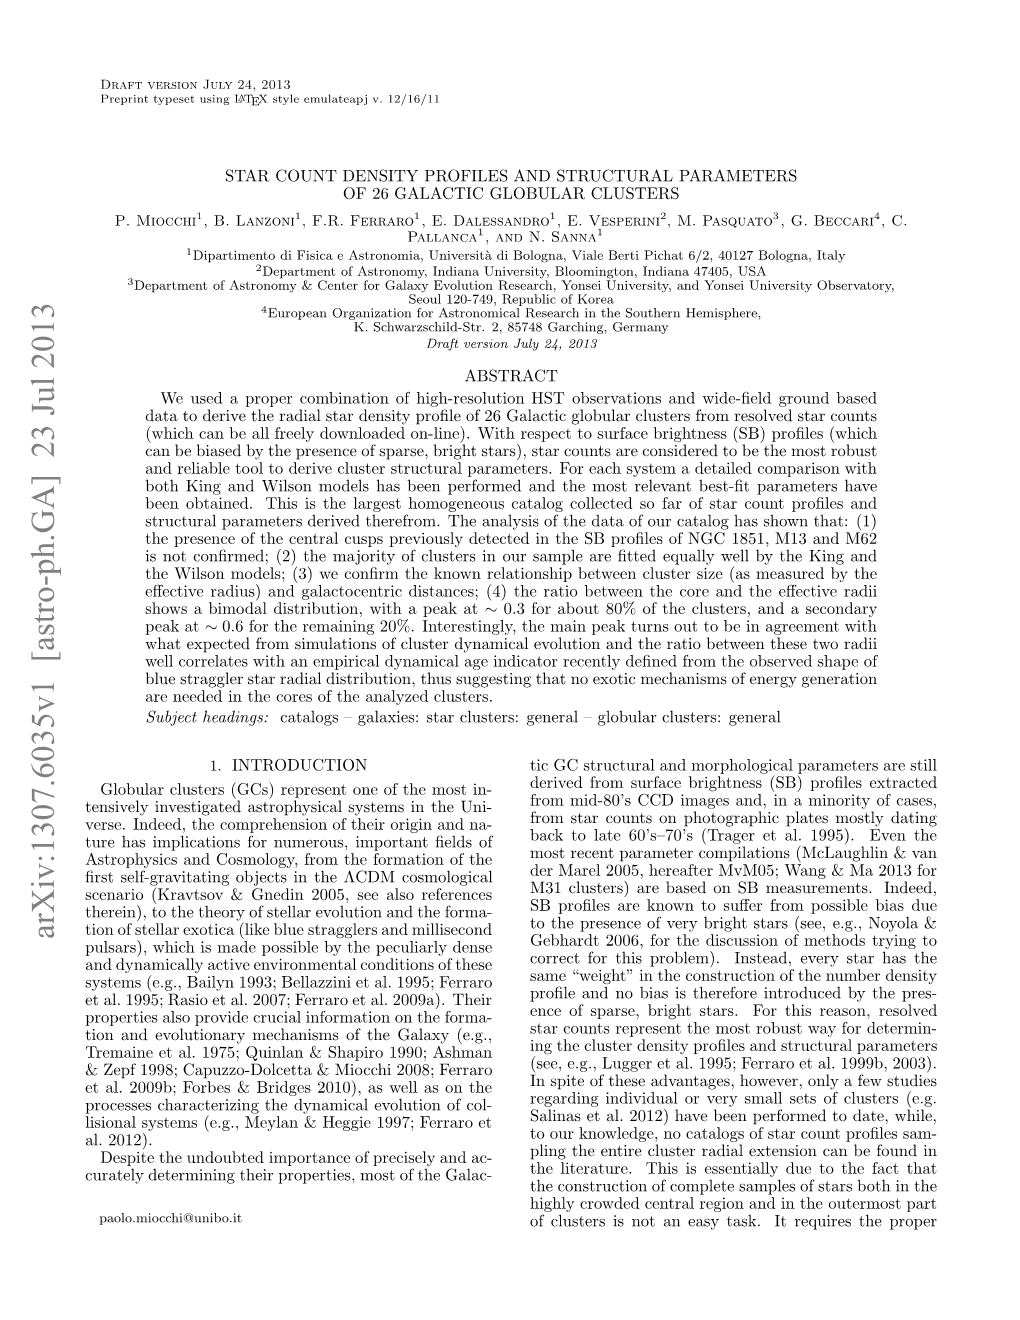 Arxiv:1307.6035V1 [Astro-Ph.GA] 23 Jul 2013 Uaeydtriigterpoete,Ms Ftegalac- the of Most Properties, Their Determining Curately Et Ferraro the 1997; on Heggie 2012)